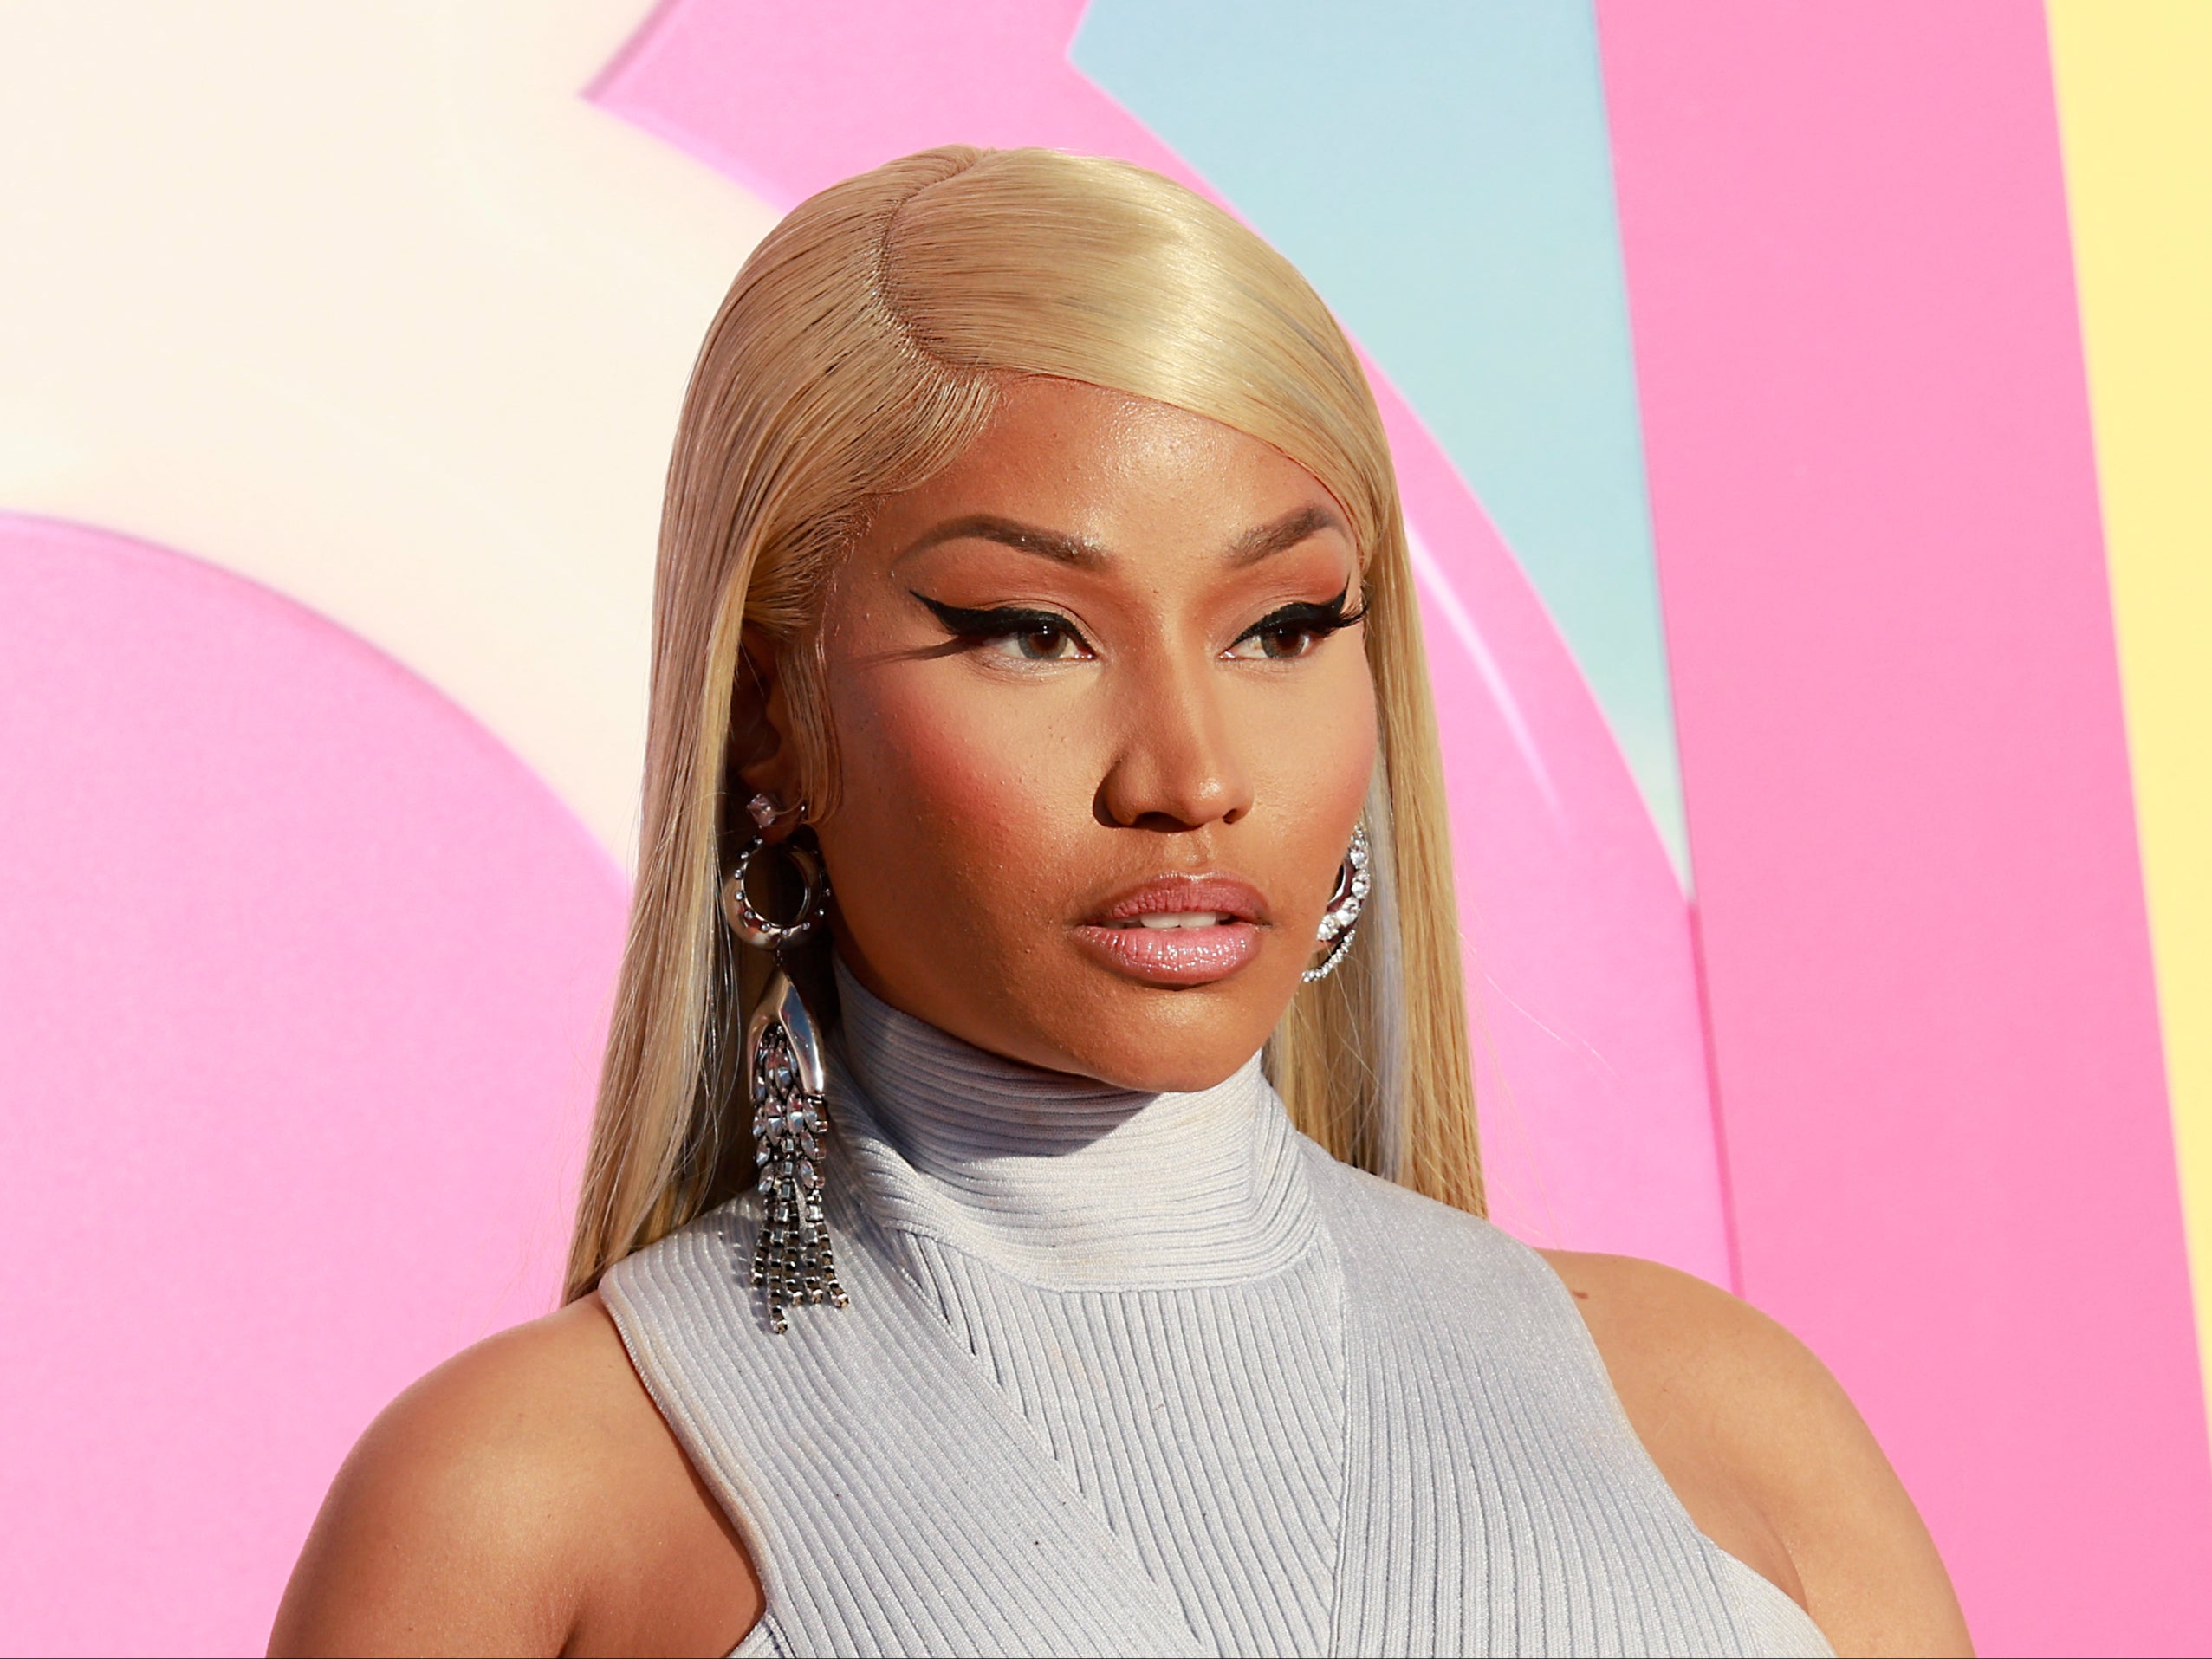 Rapper Nicki Minaj was taken into police custody in Amsterdam after she was accused of ‘carrying drugs’